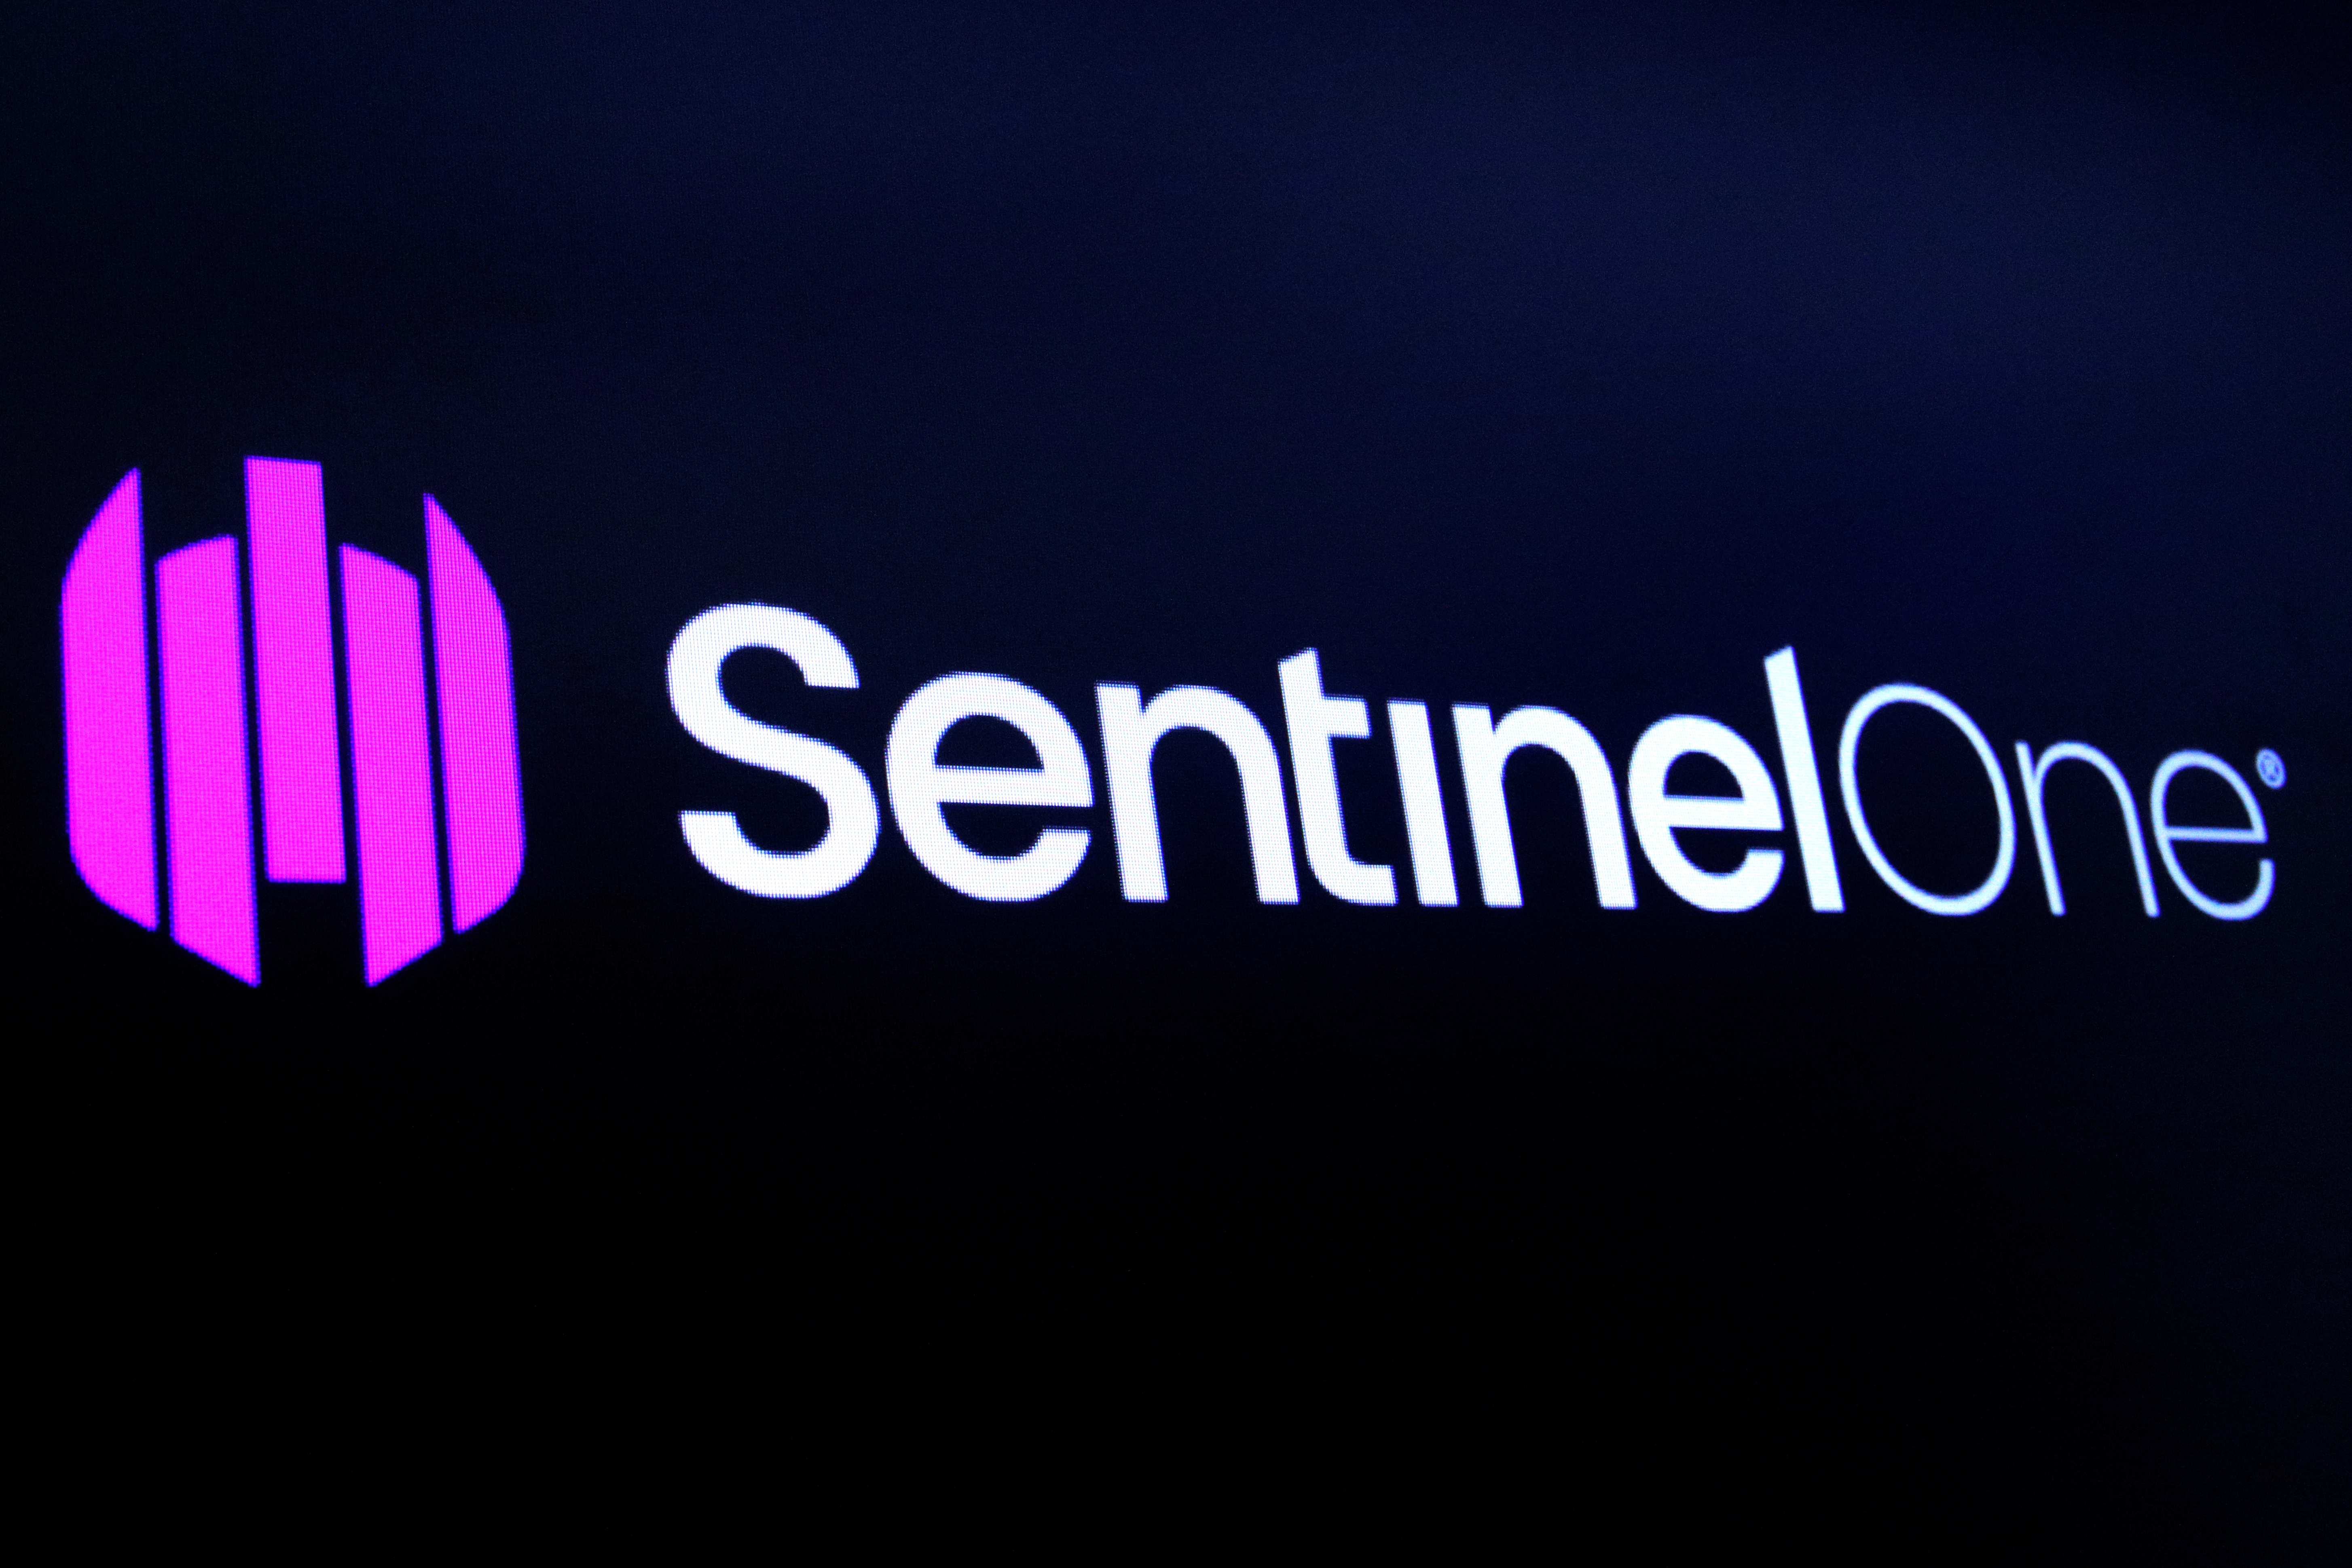 The logo for SentinelOne Inc, a cybersecurity firm, is displayed on a screen during the company’s IPO at the NYSE in New York